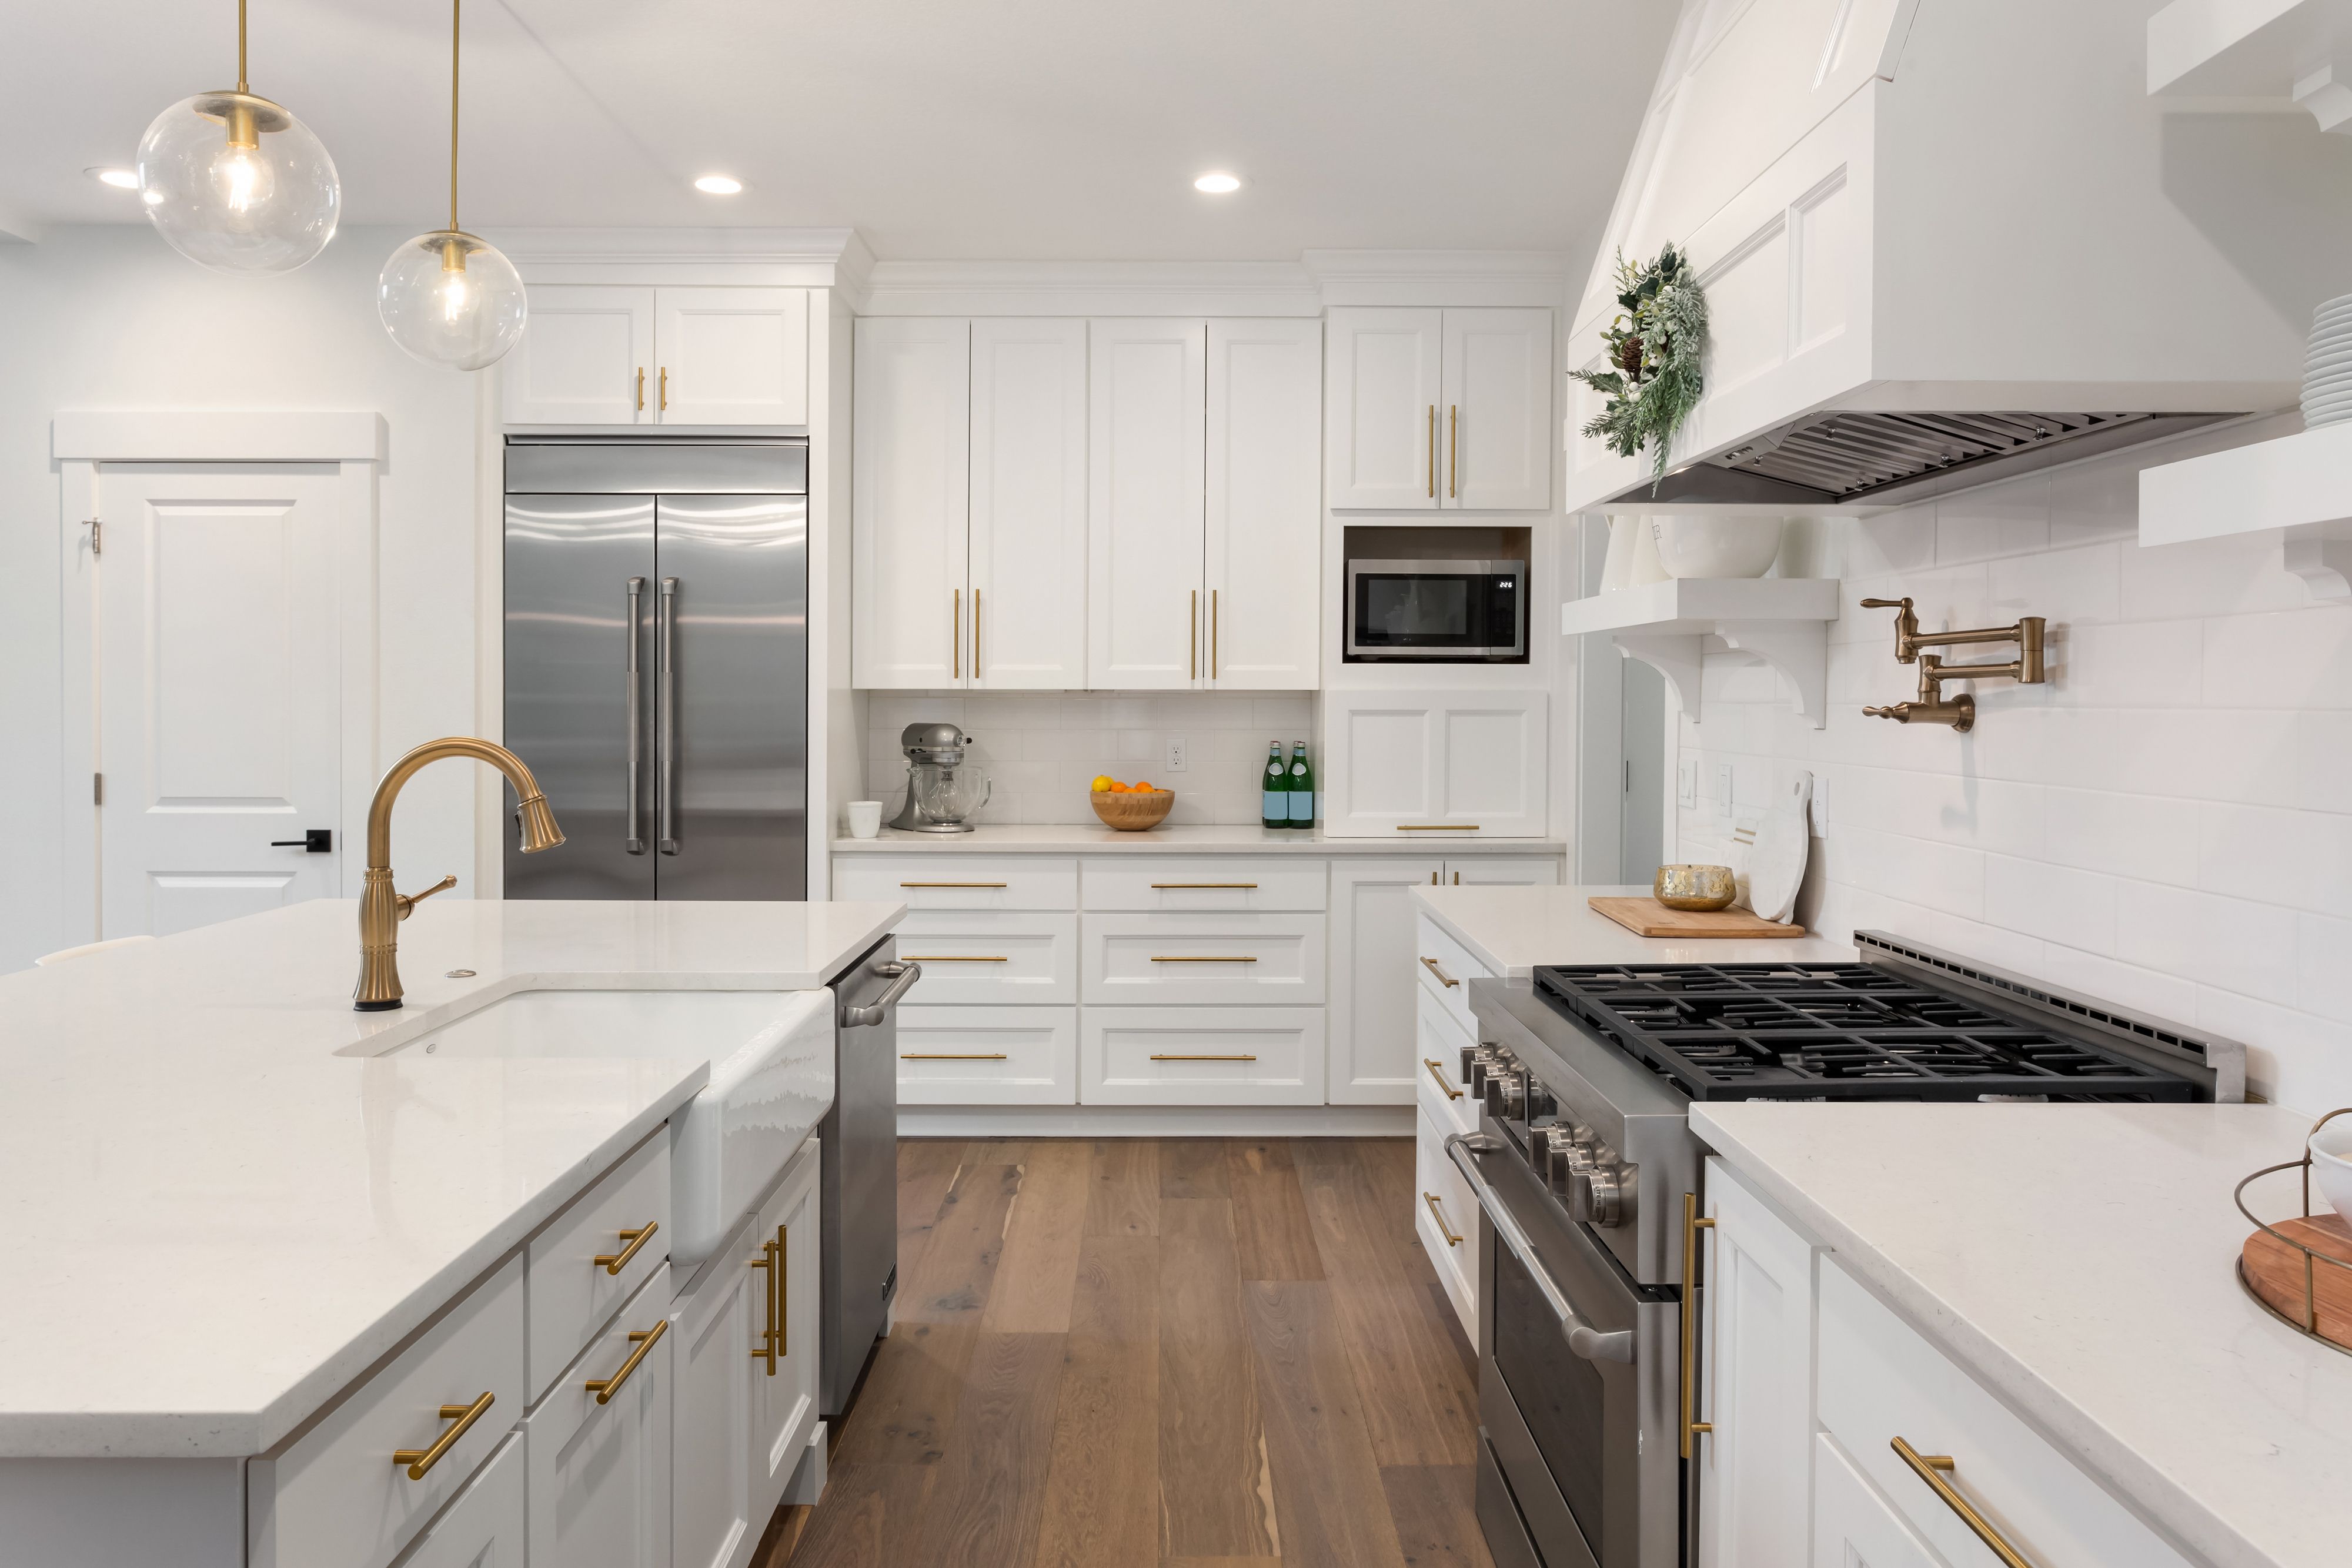 How To Decide What Appliances Are Best For Your Kitchen